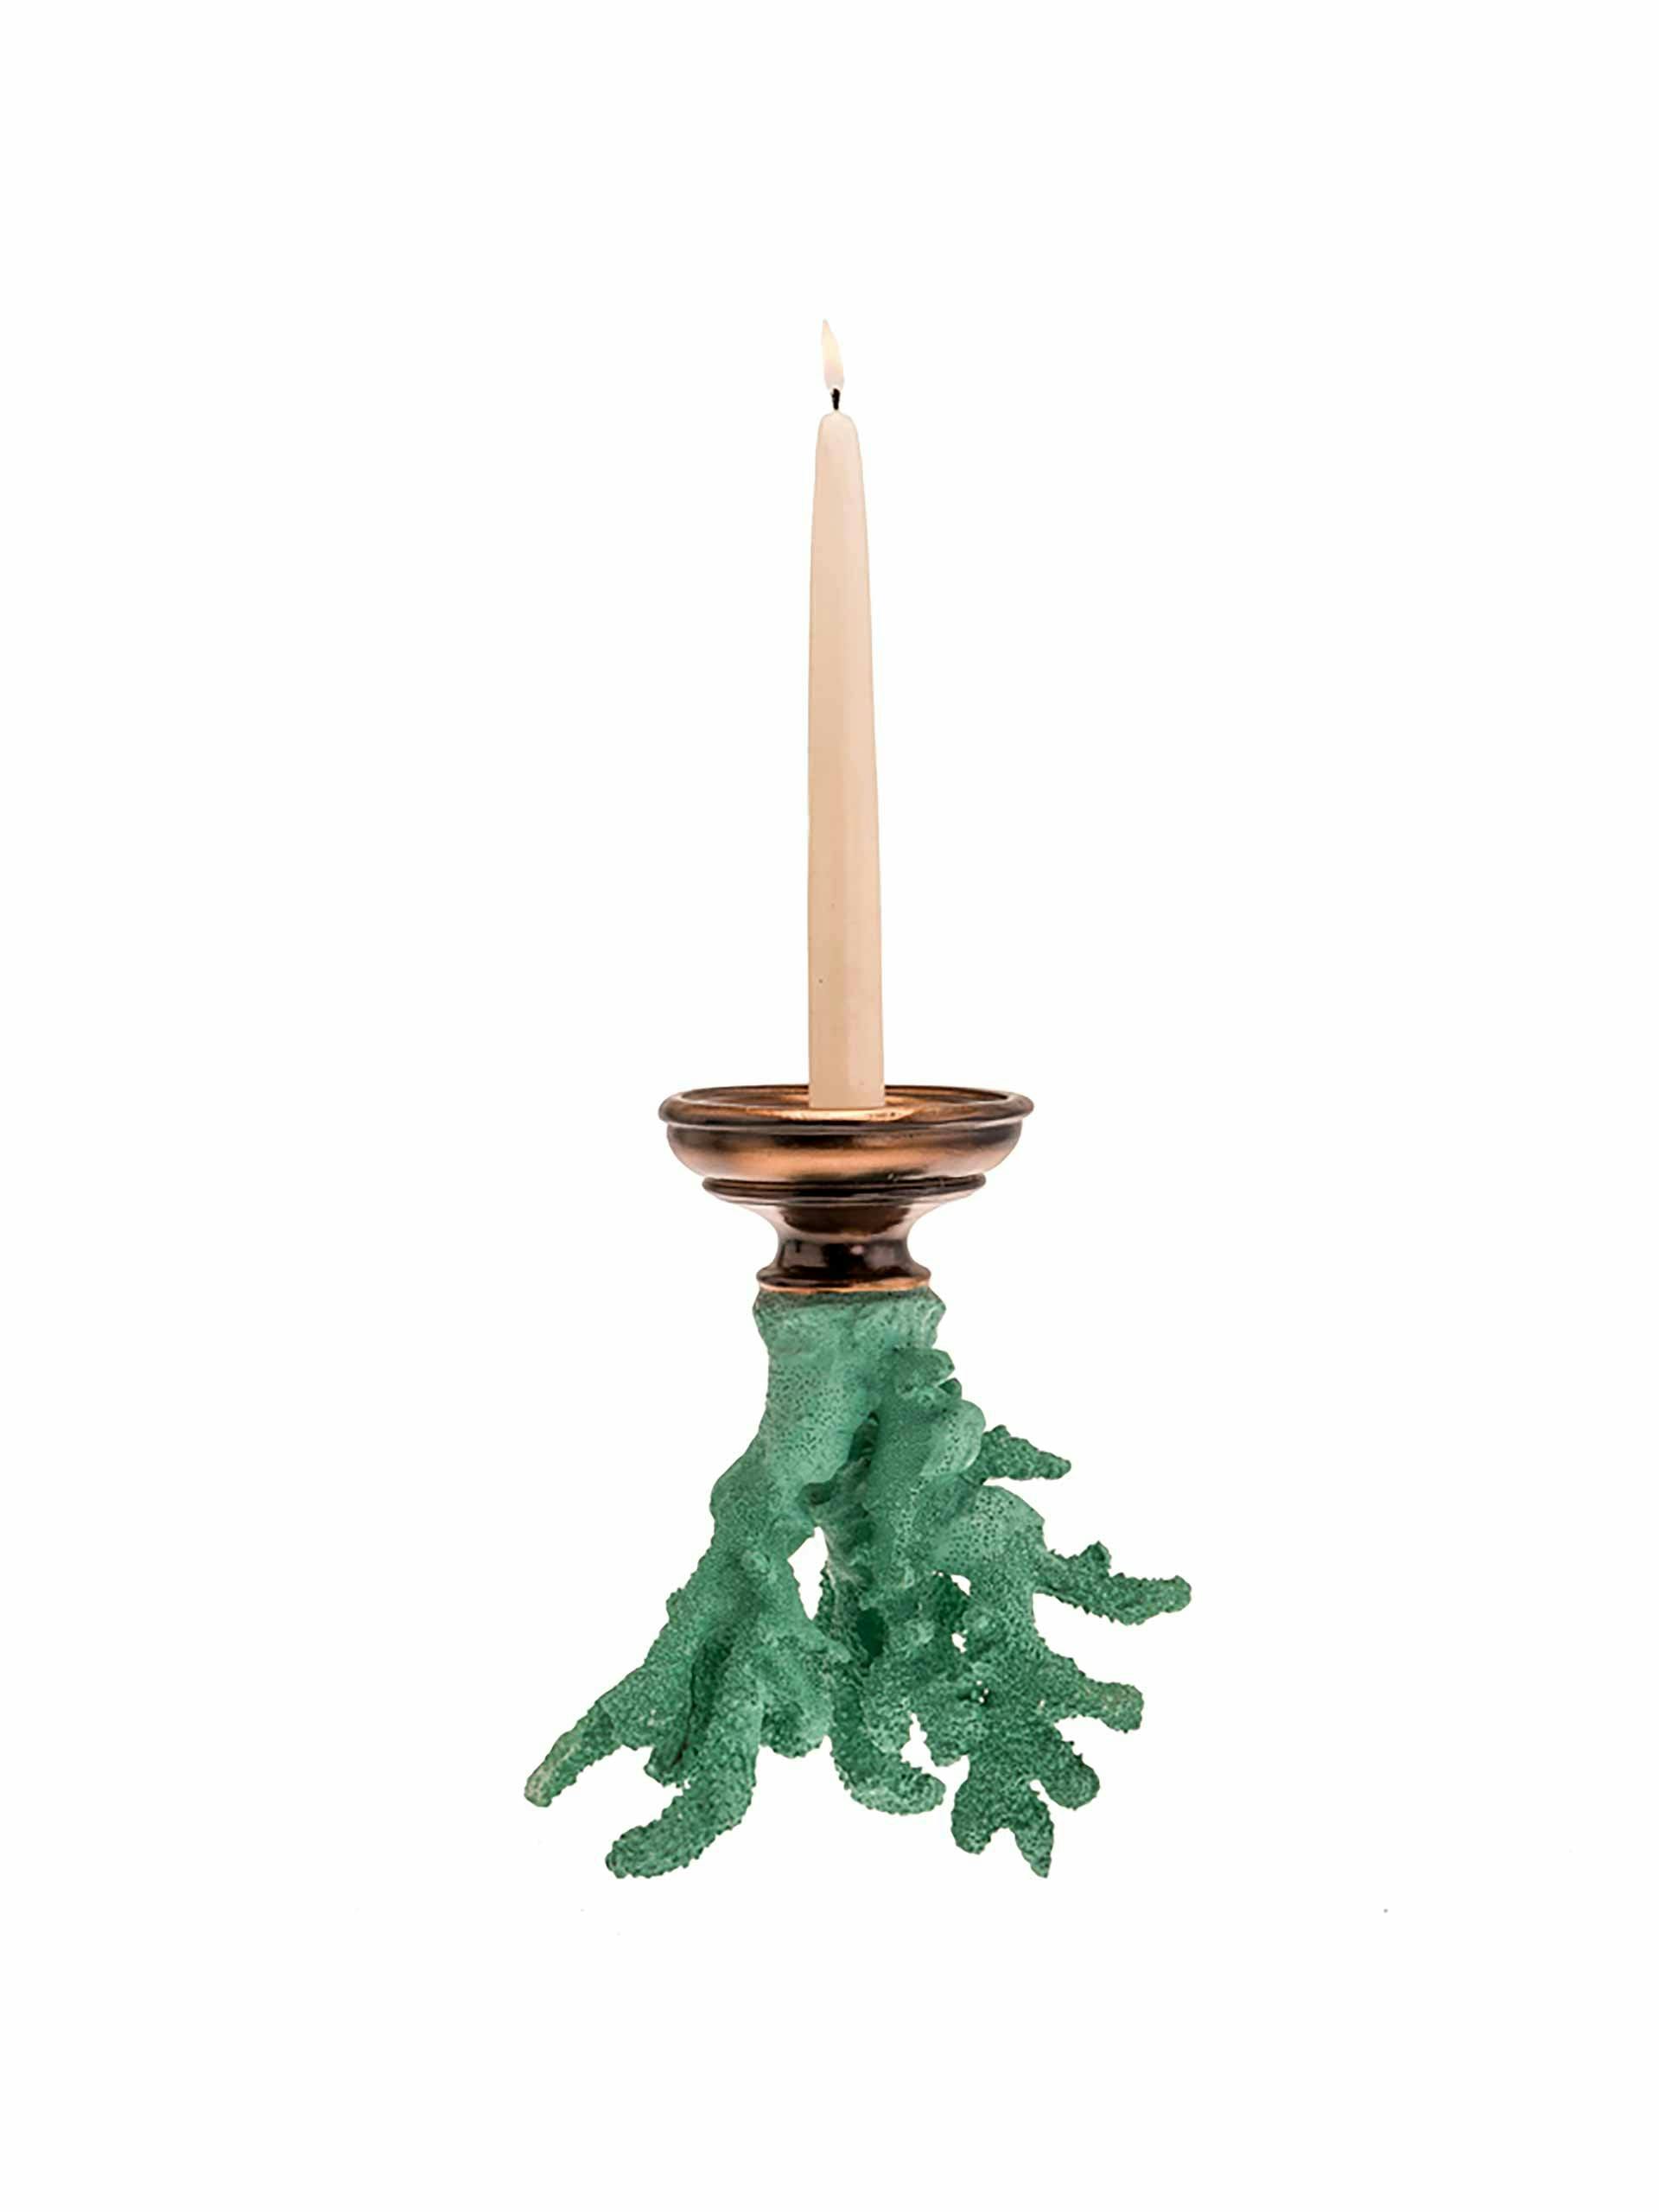 Faux coral candlestick